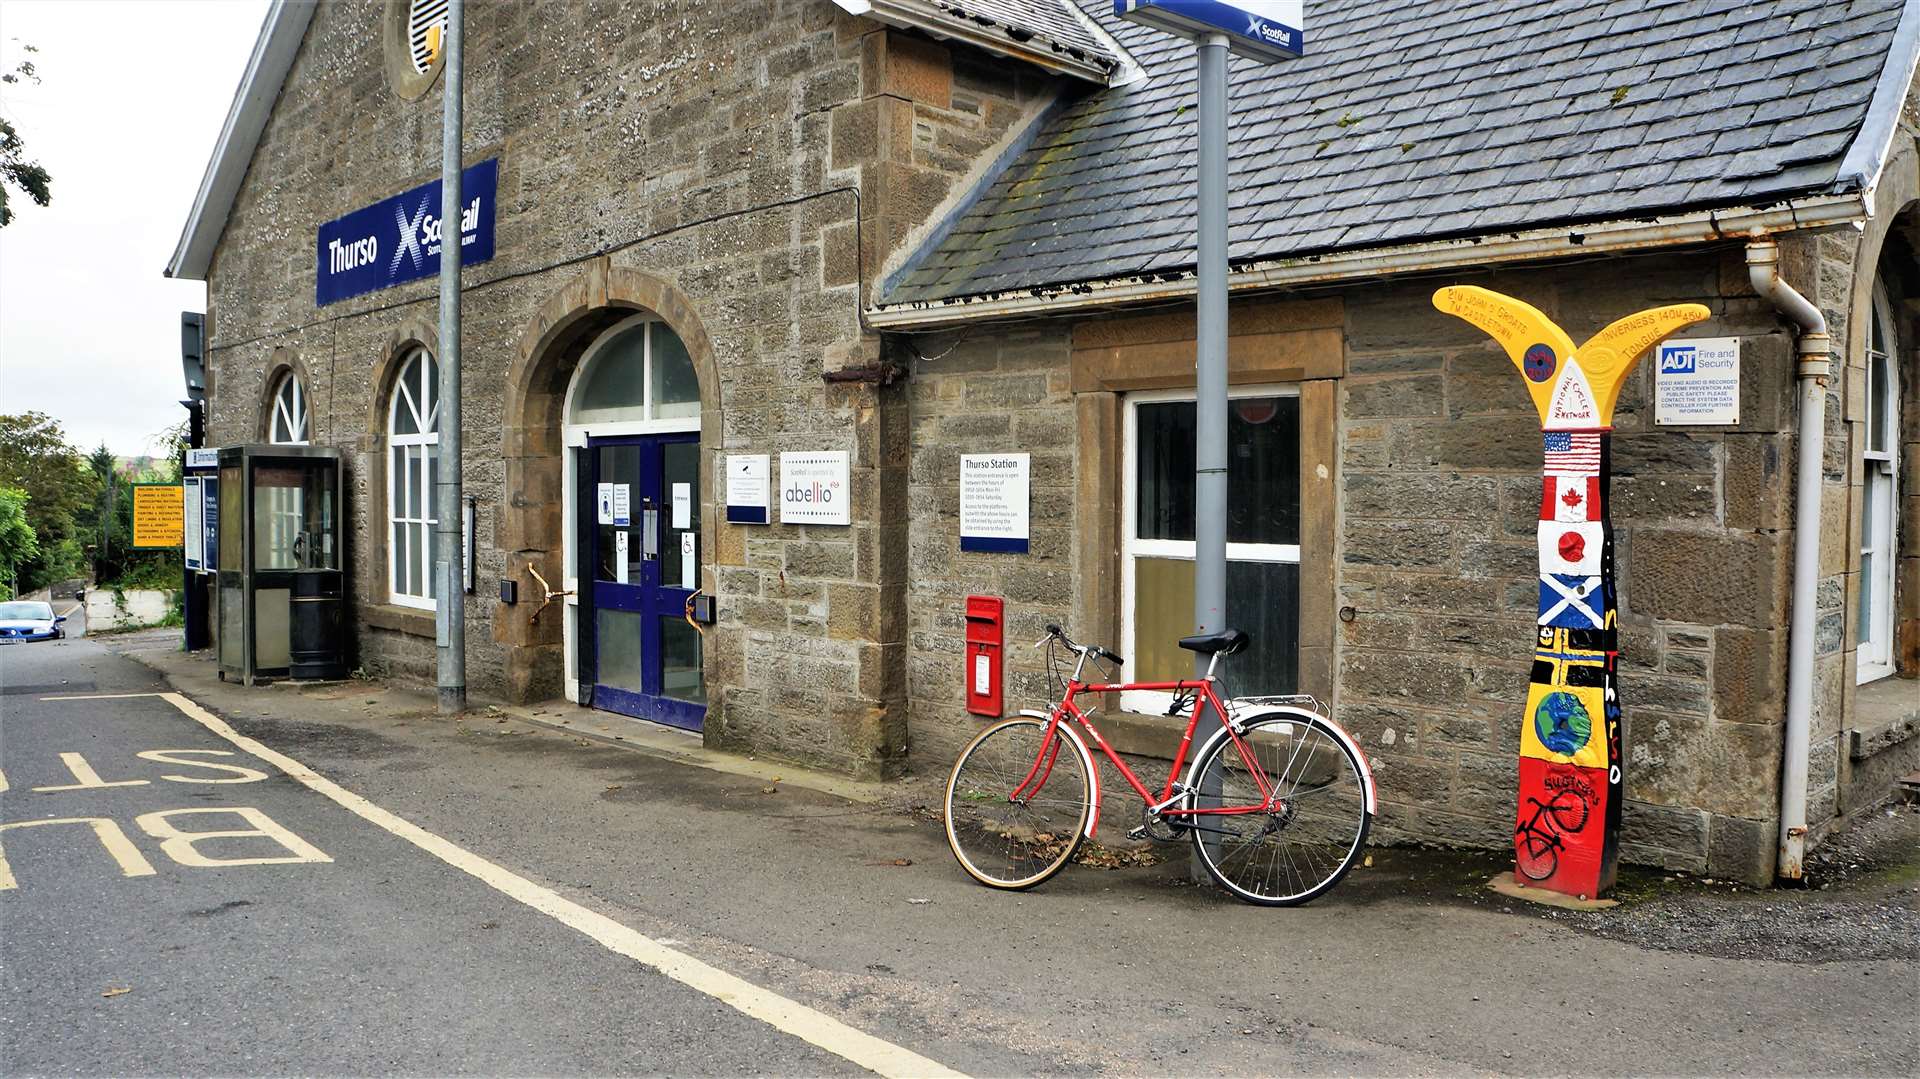 Louise Smith set out from Thurso railway station and felt let down by the poor services. Picture: DGS